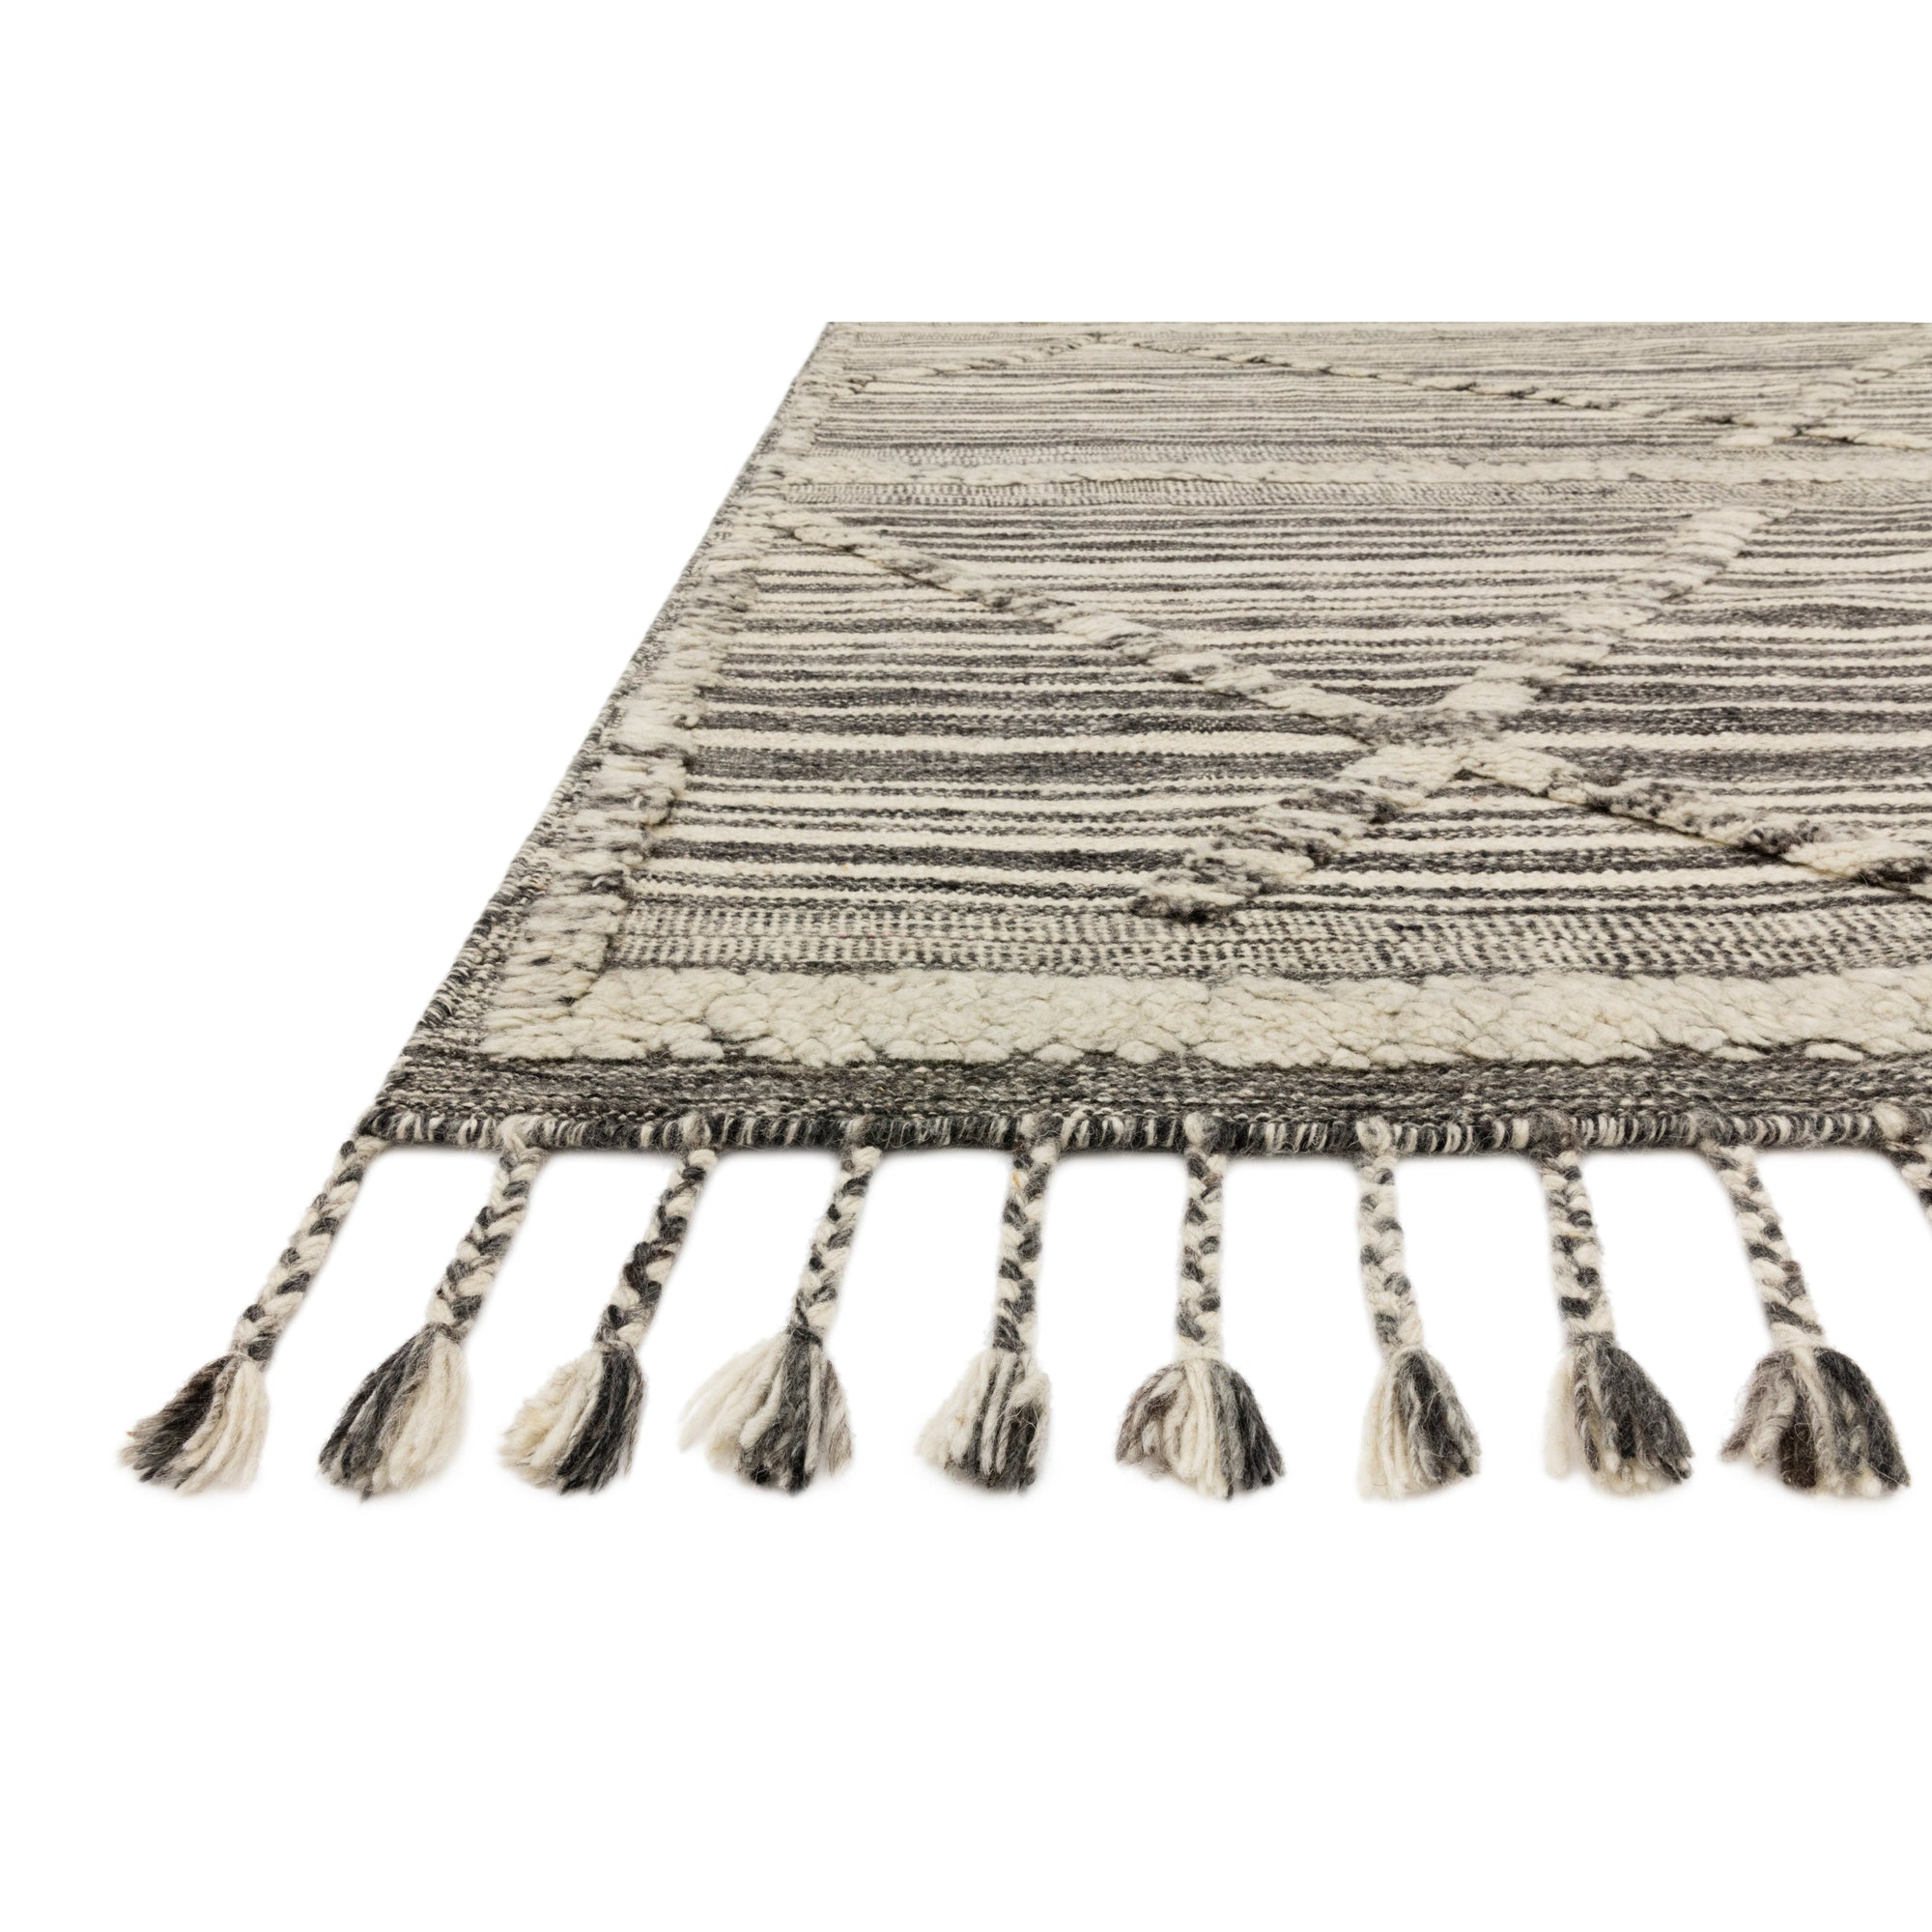 Rugs by Roo Loloi Iman Ivory Charcoal Area Rug in size 18" x 18" Sample